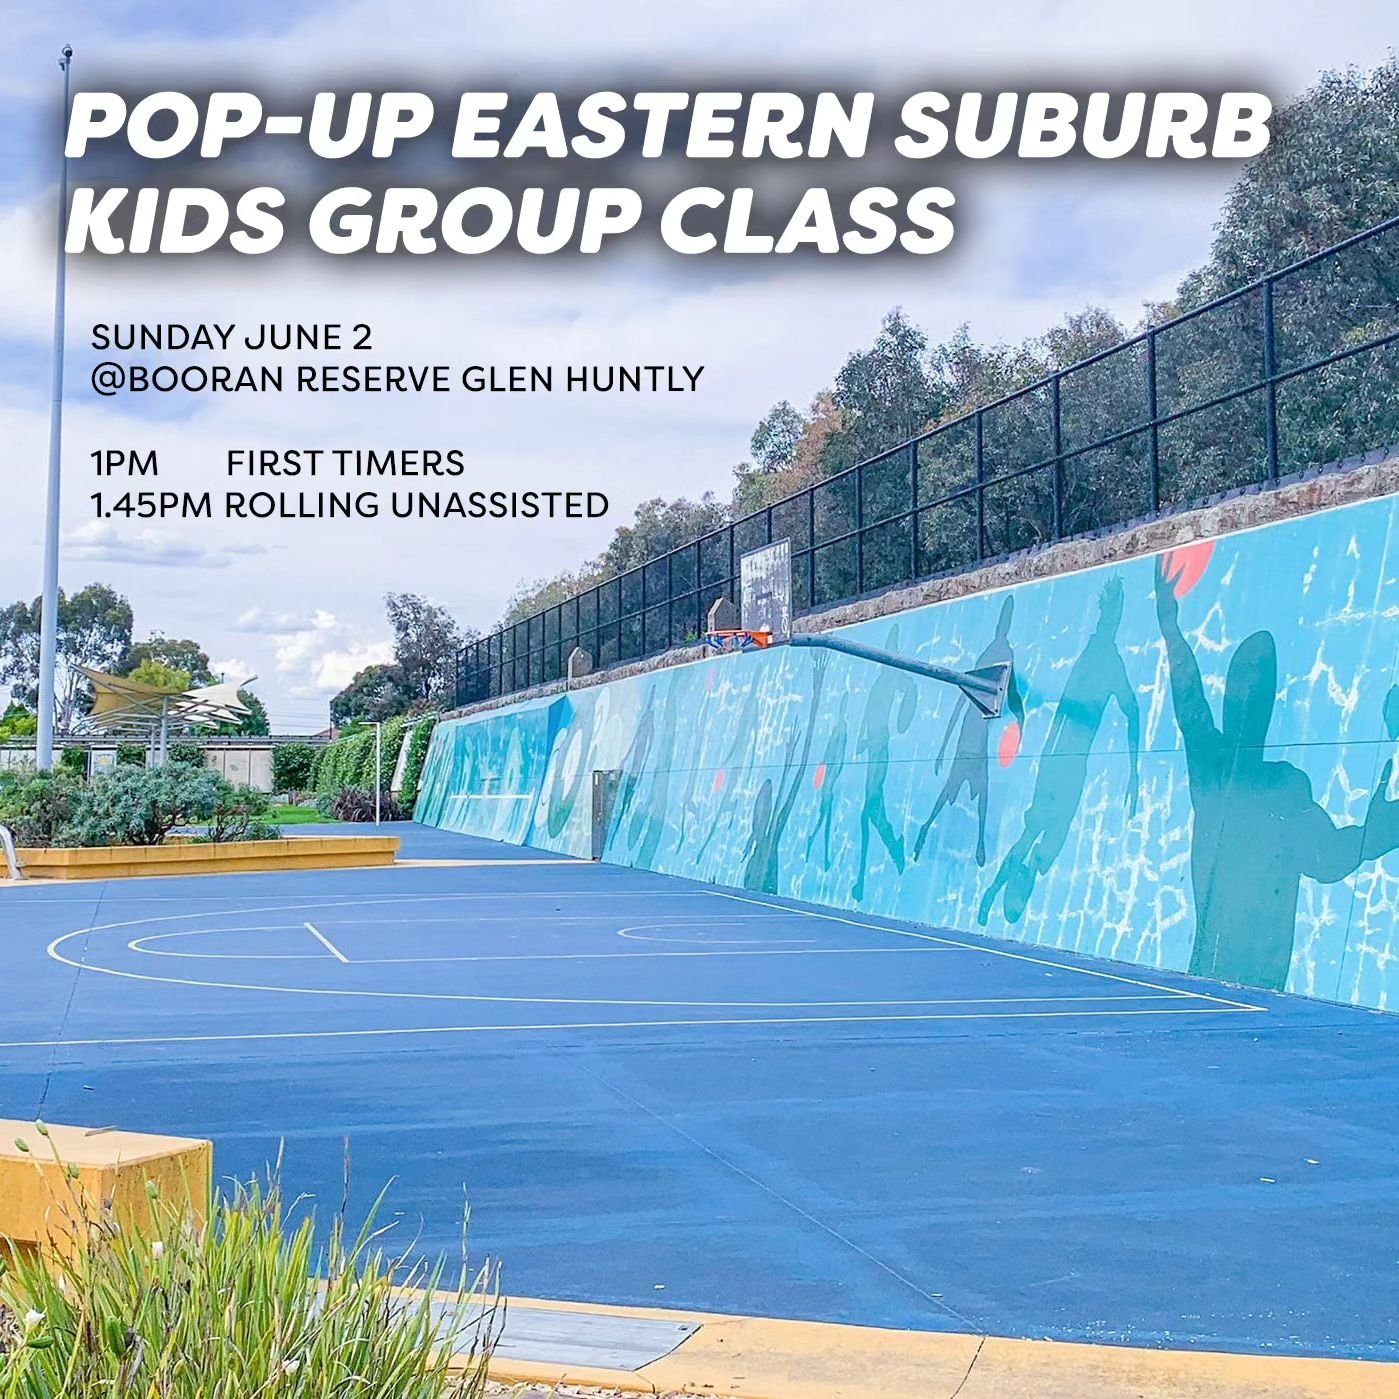 I'm venturing to the EASTERN SUBURB!!!
1 day only - Sunday 2 June
Bringing a couple of small group classes for kids.

1pm - for kids who are wobbly, nervous, those First timers 
1.45pm - for kids who are Rolling Unassisted 
Very limited spots 5 kids 